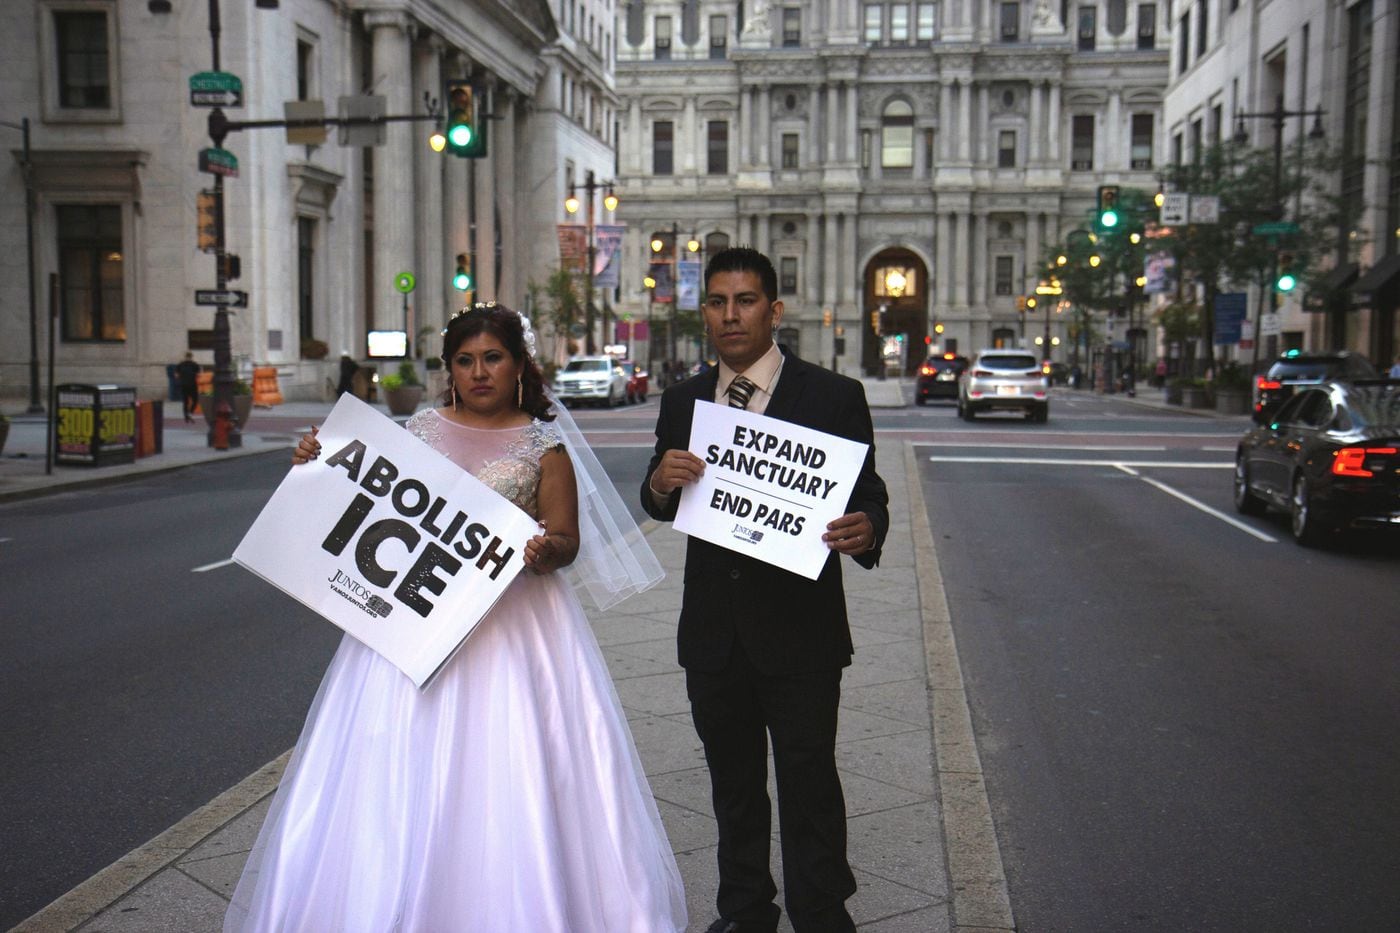 Linda Hernandez and her husband on their wedding day, protesting PARS and ICE as a Juntos initiative captured in the "Expand Sanctuary" documentary by filmmaker and festival programming director Kristal Sotomayor (not pictured) to be screened during the Philadelphia Latino Film Festival June 5.